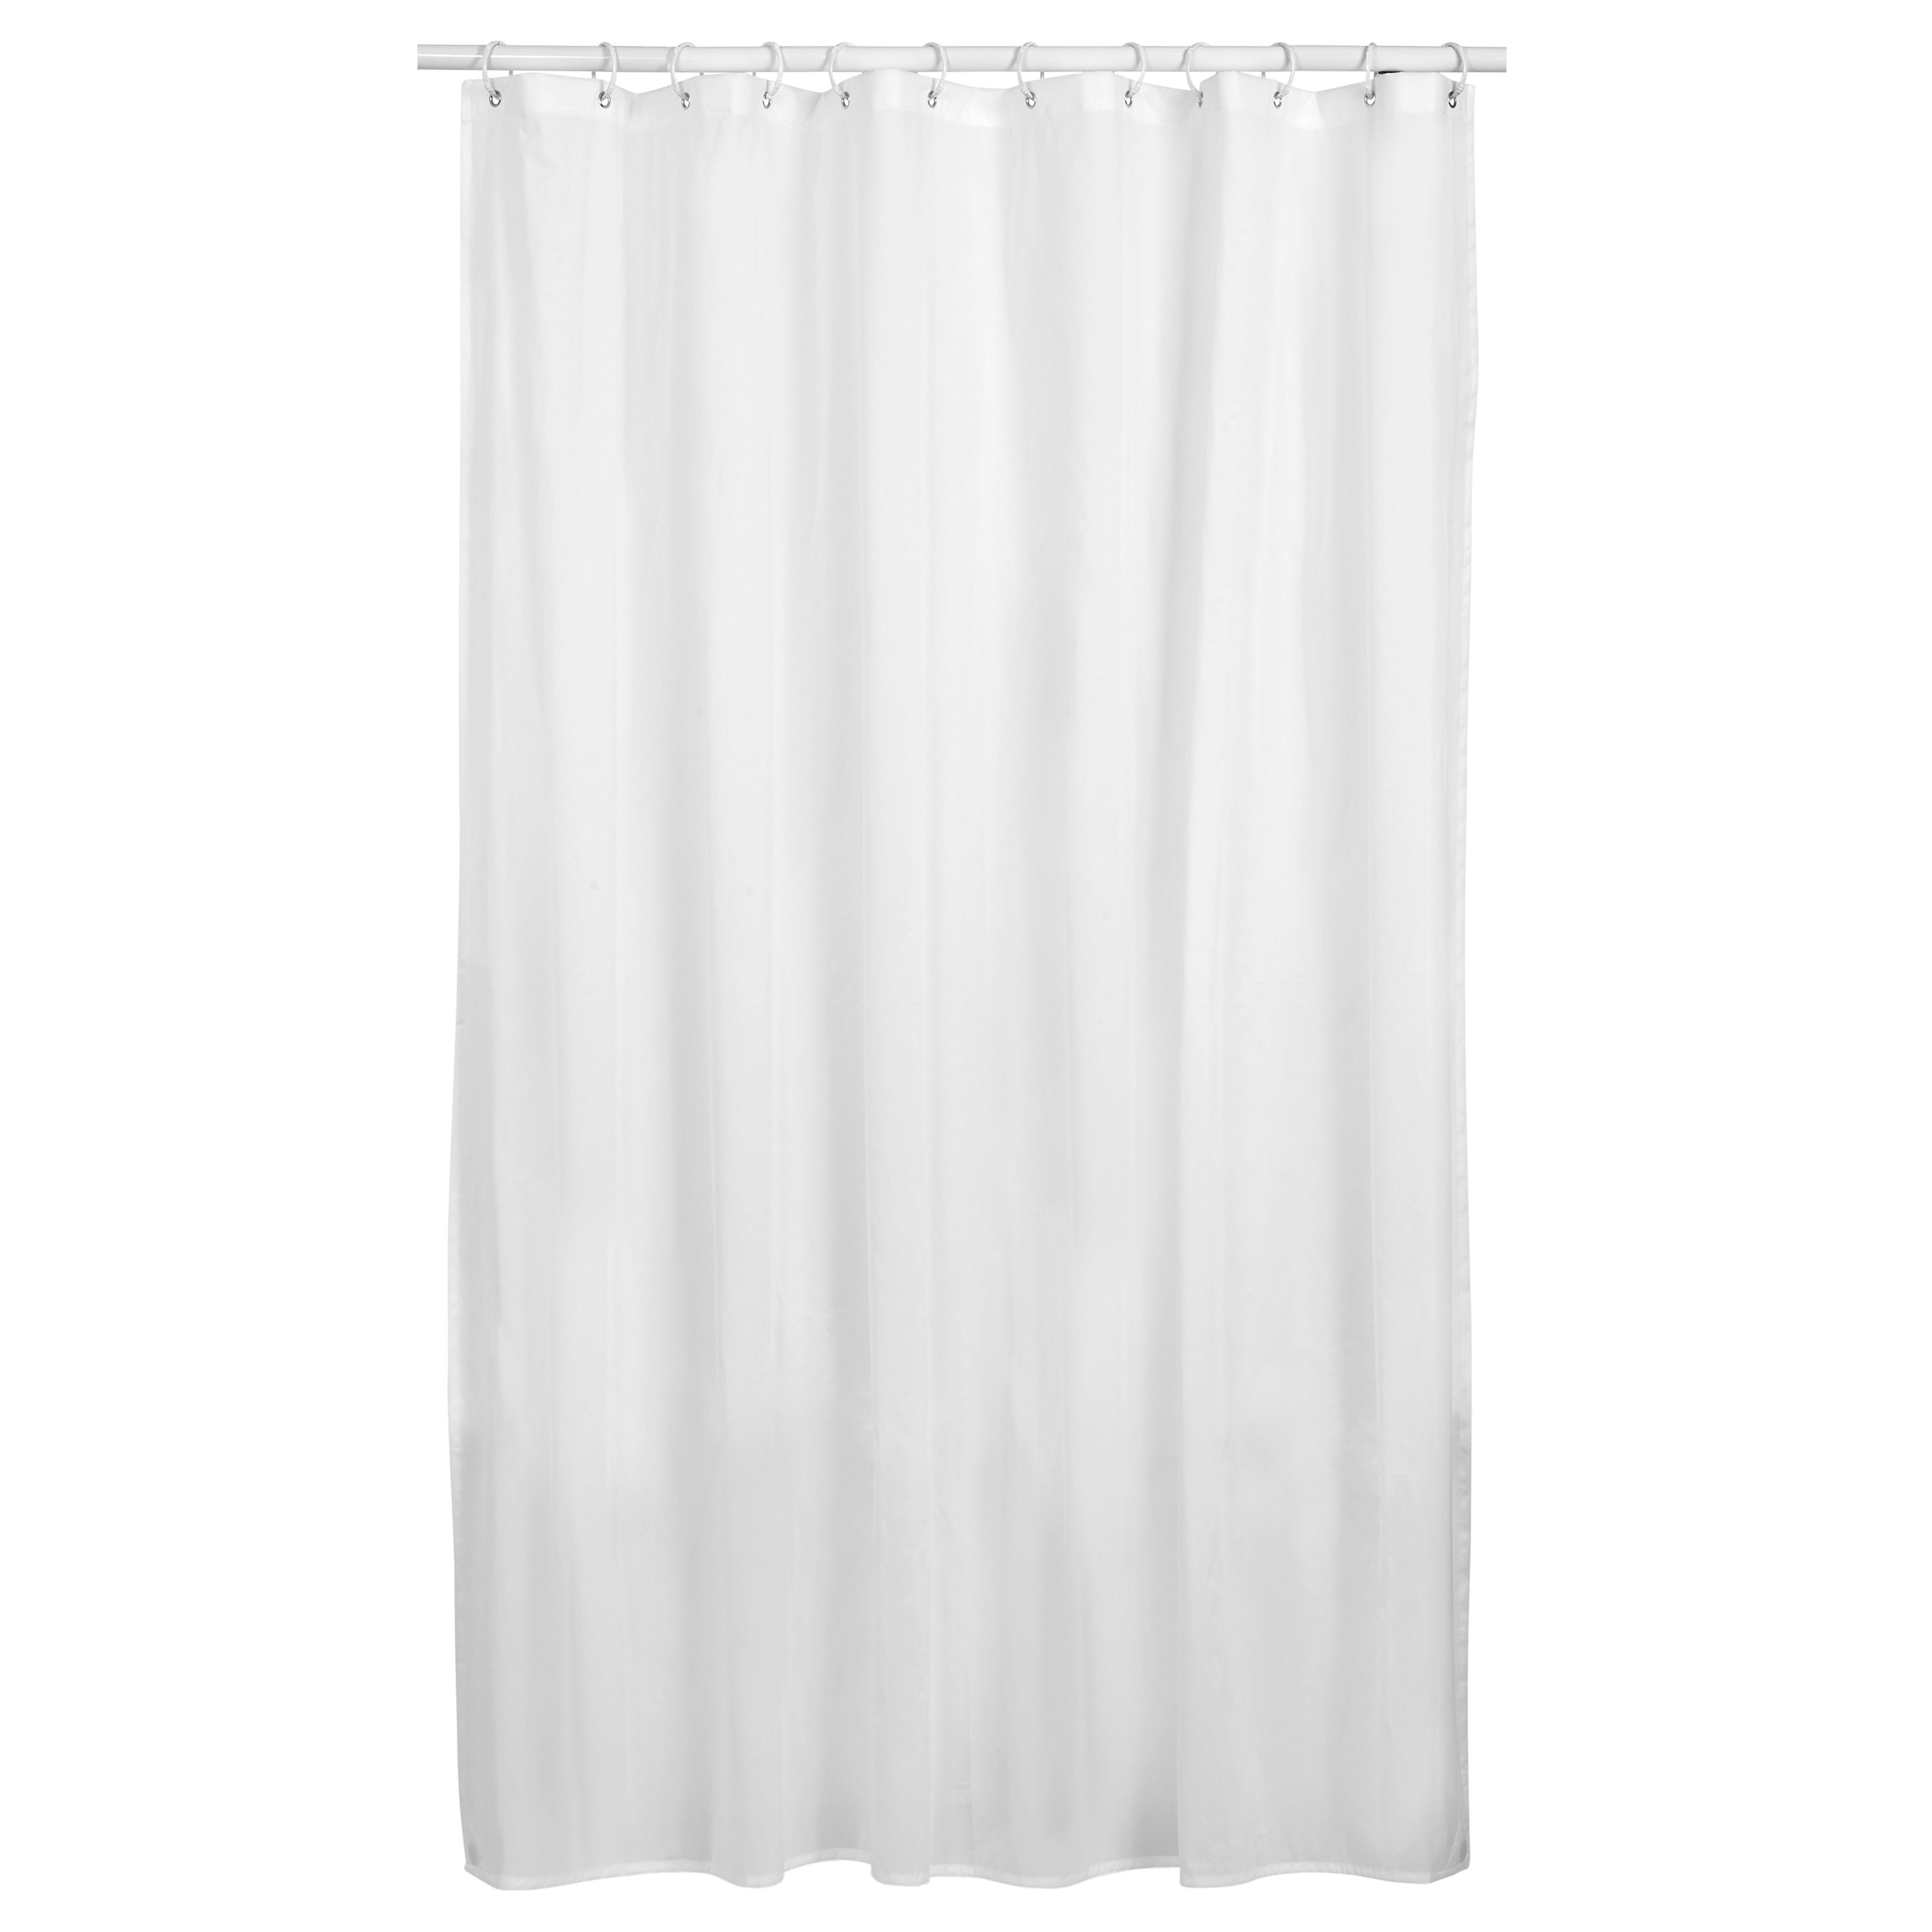 Grey circle Shower Curtain With Free Hooks New Waterproof Bathroom Curtain gift 